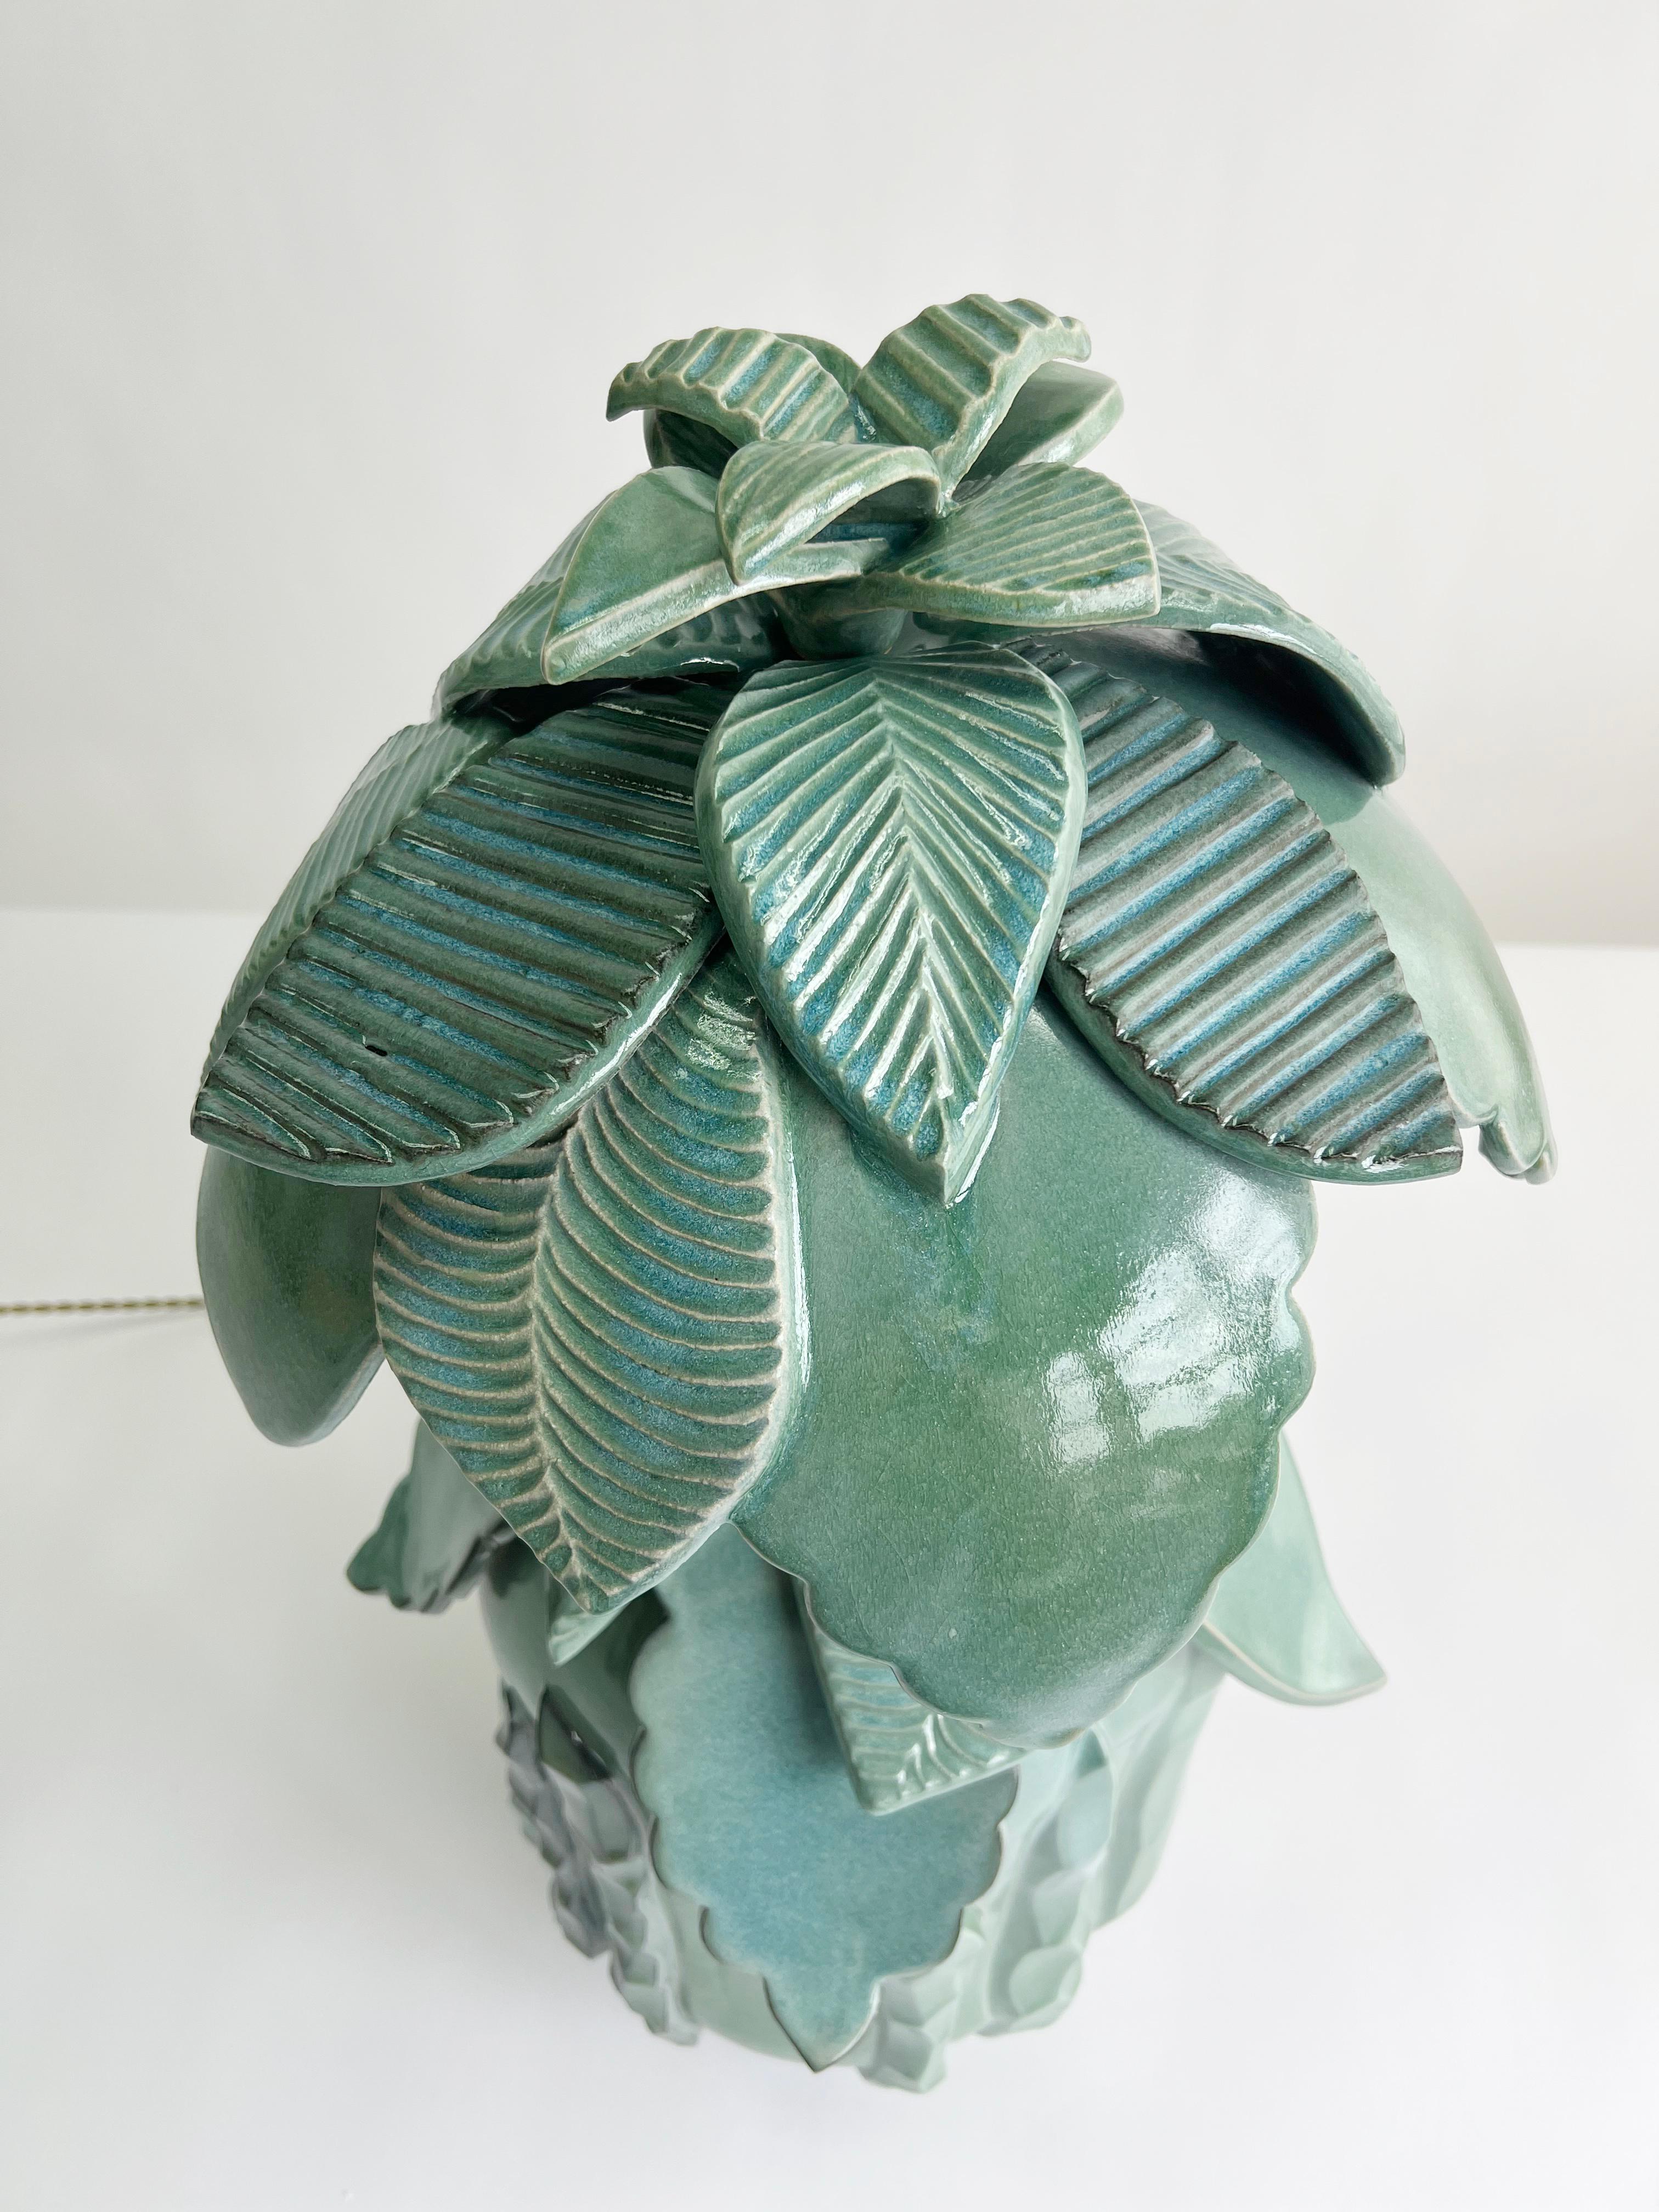 Inspired by architectural details from southern Spain, this ceramic stoneware lamp features hand-sculpted and carved, cascading leaves forming the finial, lamp body and lamp shade. The cascading leaf design continues atop the substantial lamp body.